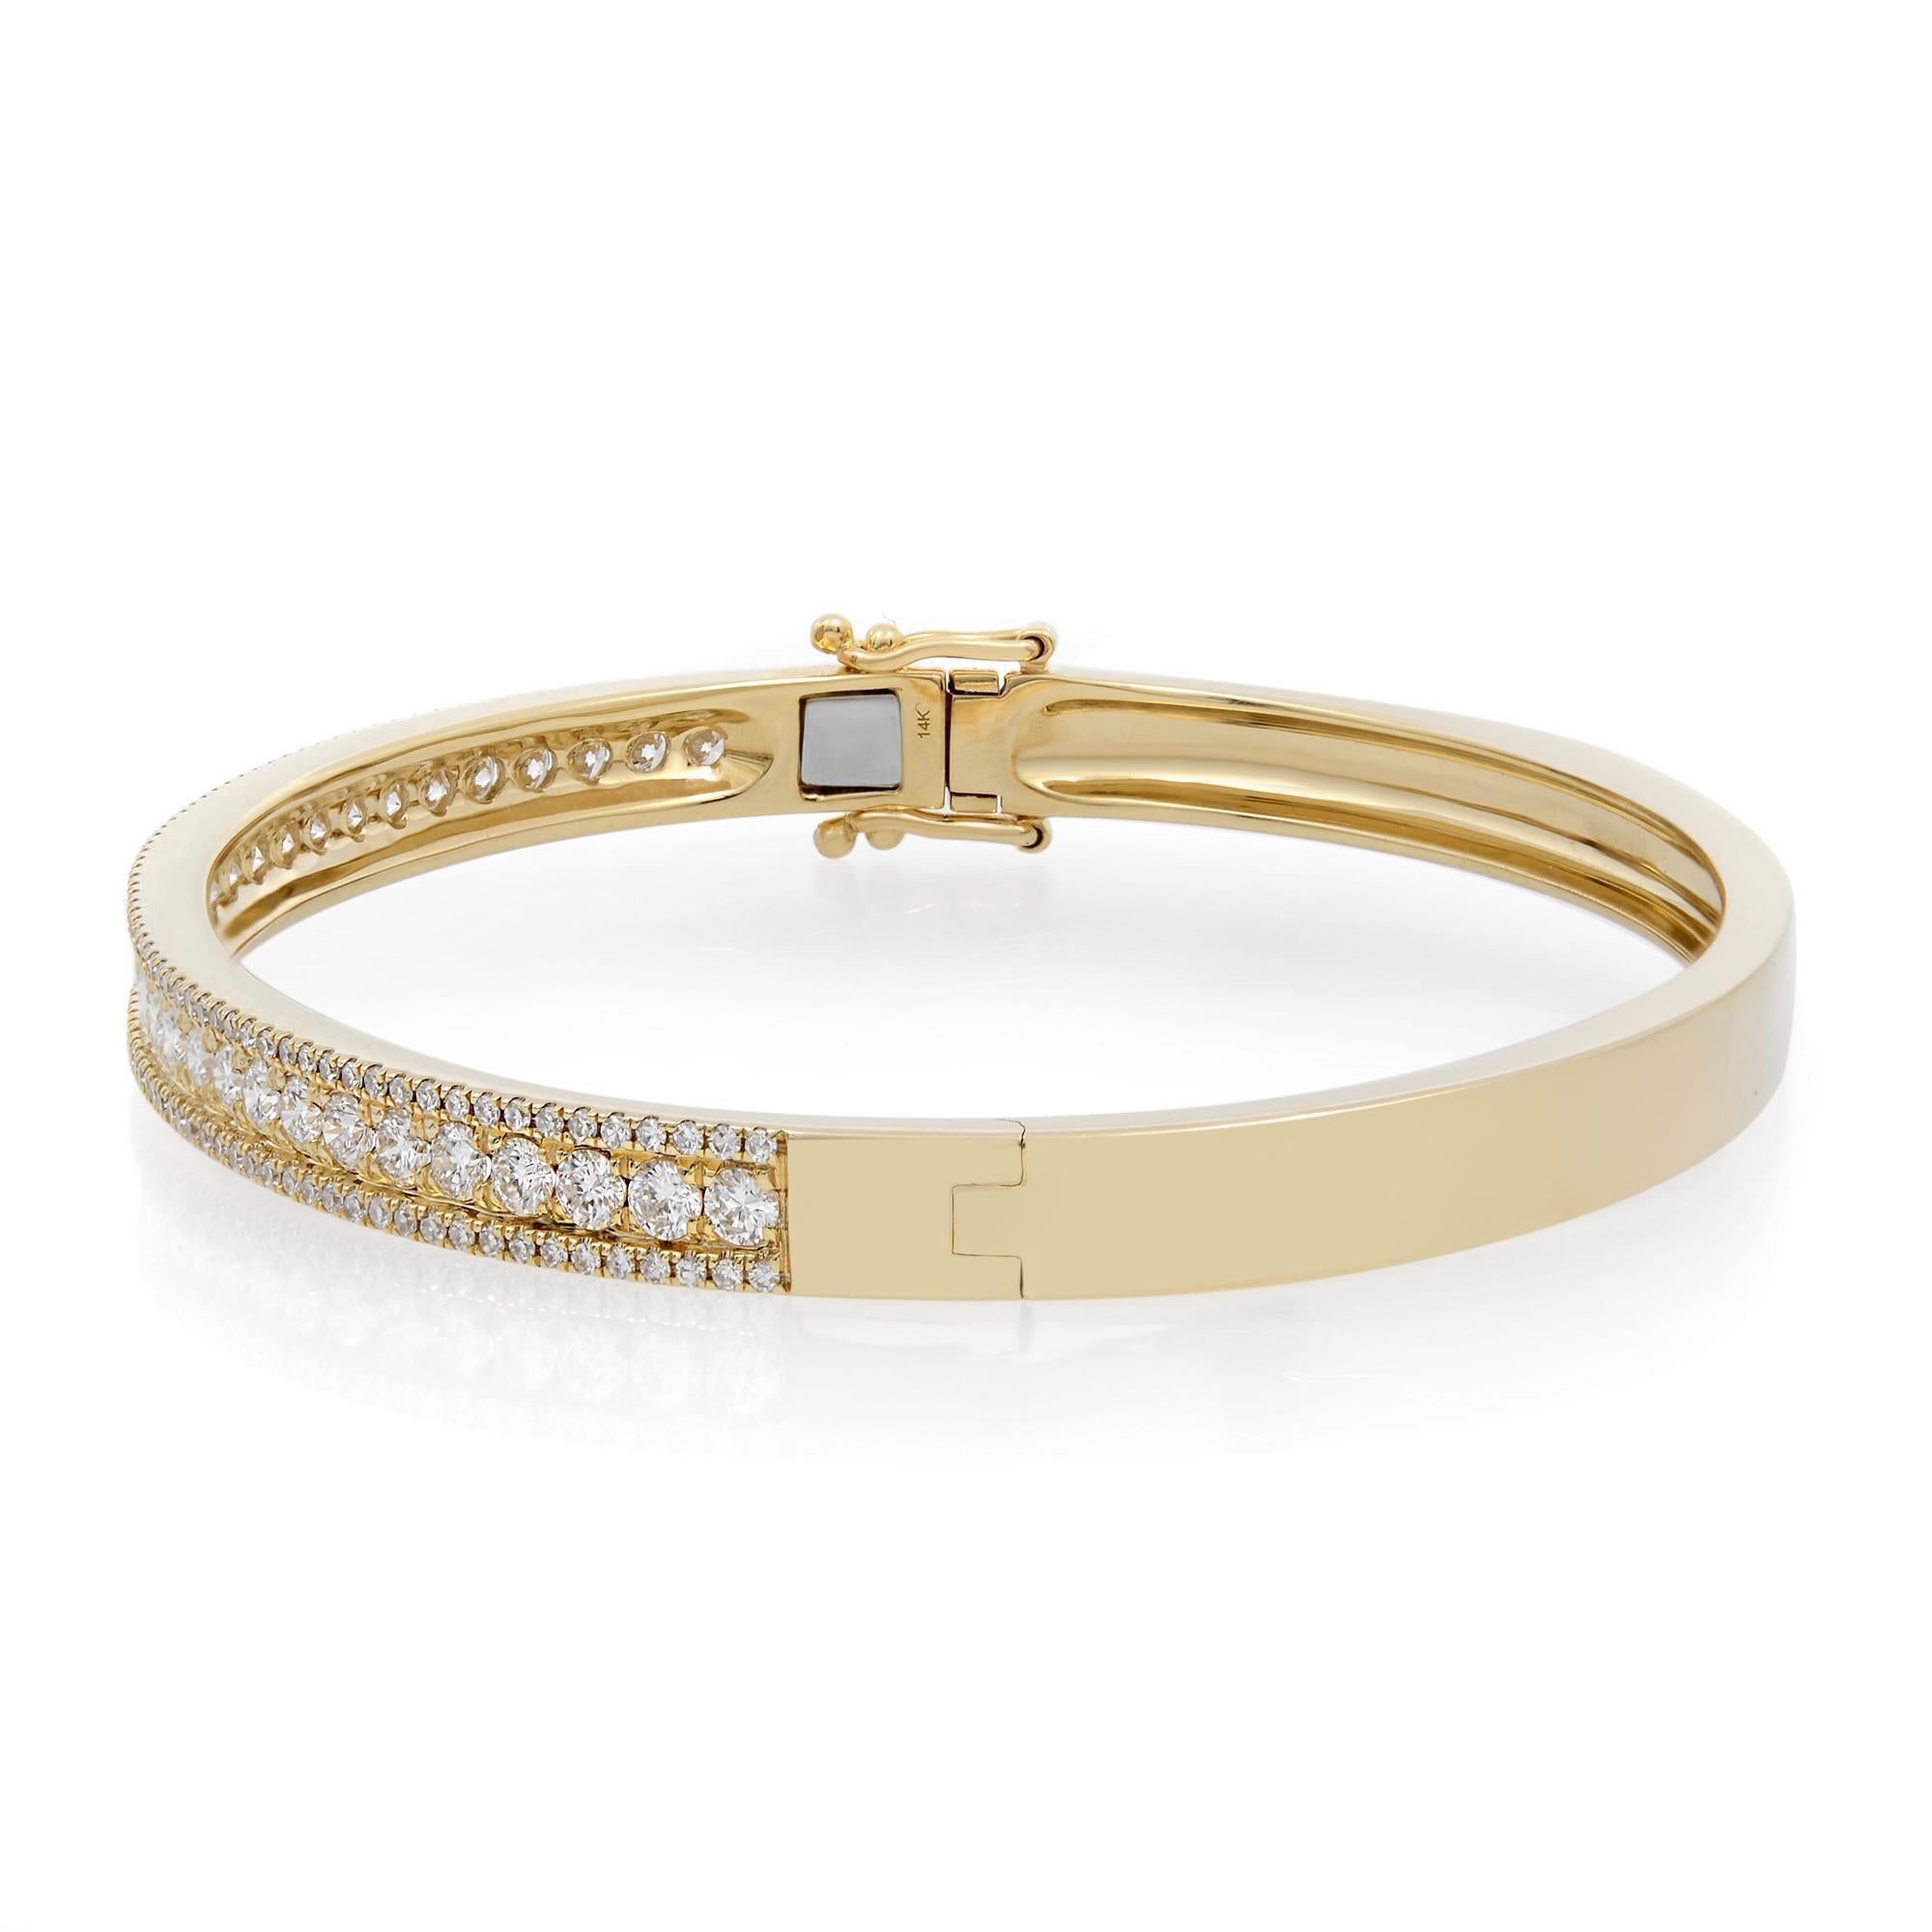 This stunning and exemplary bracelet is crafted in high polished 14K yellow gold. Starring sparkling radiant pave set round cut diamonds weighing 1.70 carats in total. Set halfway through the bangle. Diamond color G-H and clarity VS-SI. It's